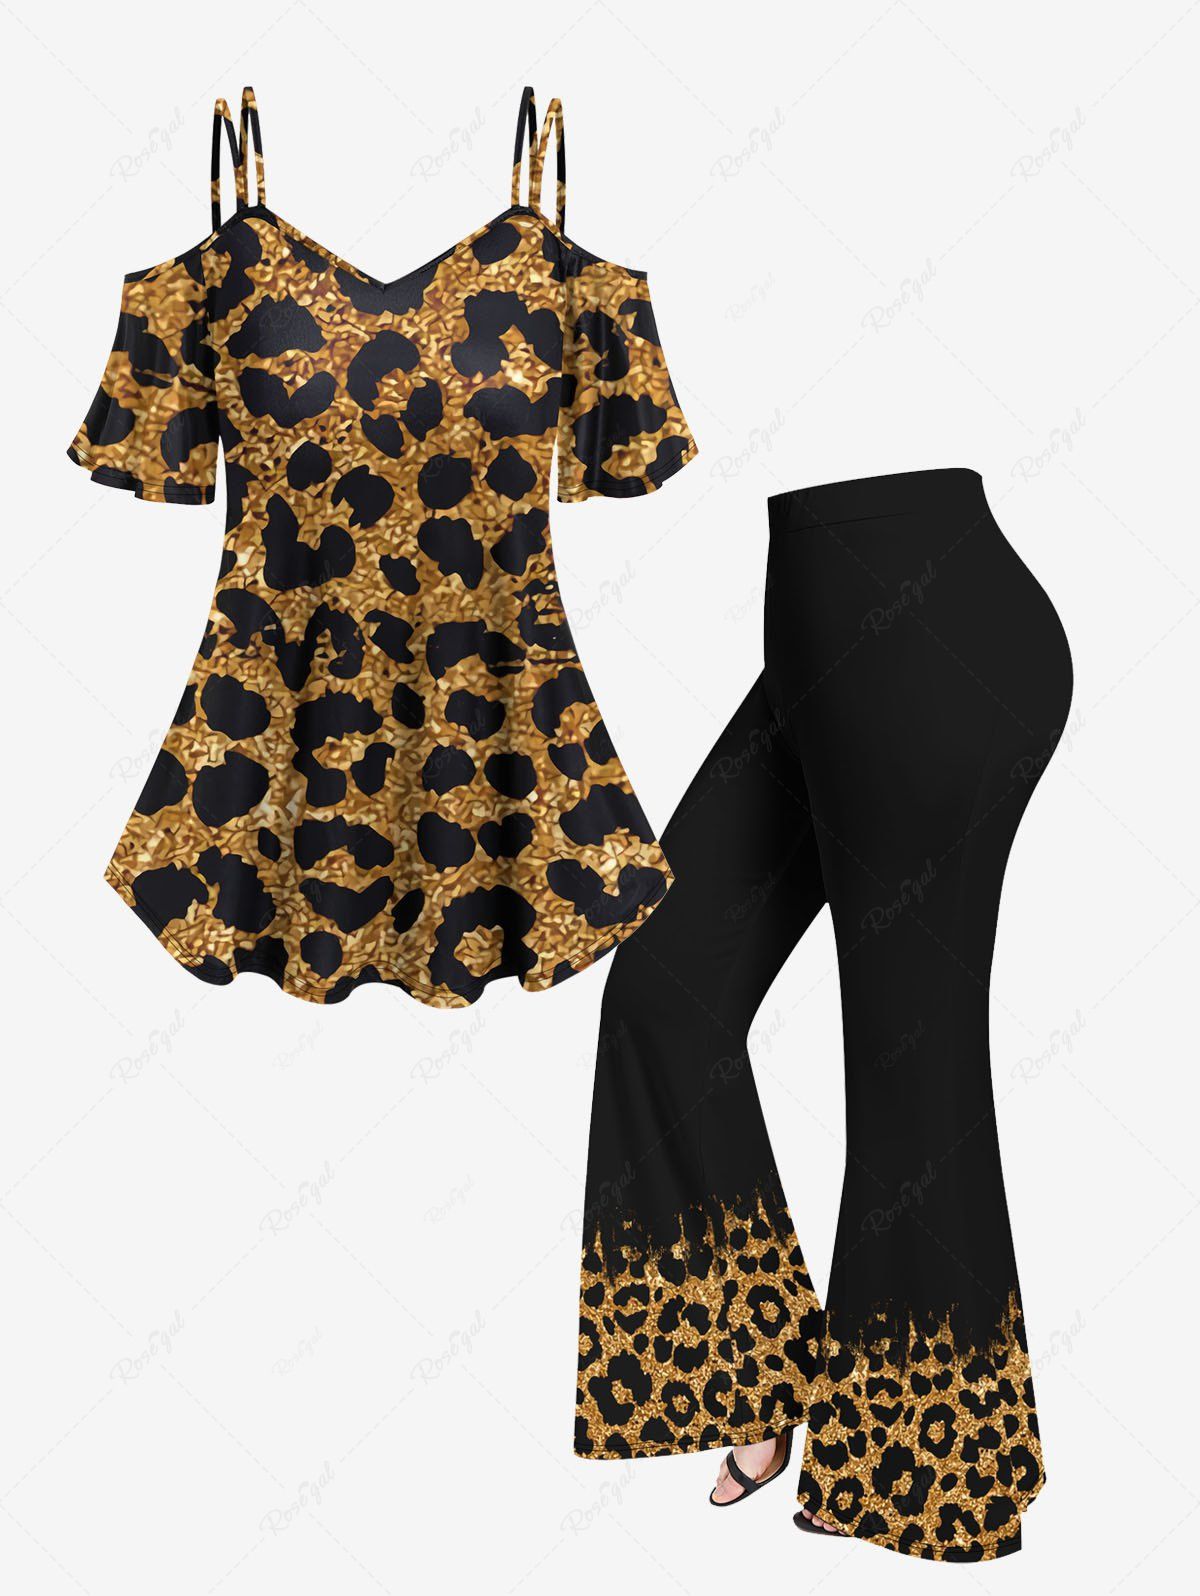 Buy Leopard Glitter Sparkling Sequin 3D Printed Cold Shoulder T-shirt and Flare Pants Plus Size Outfit  